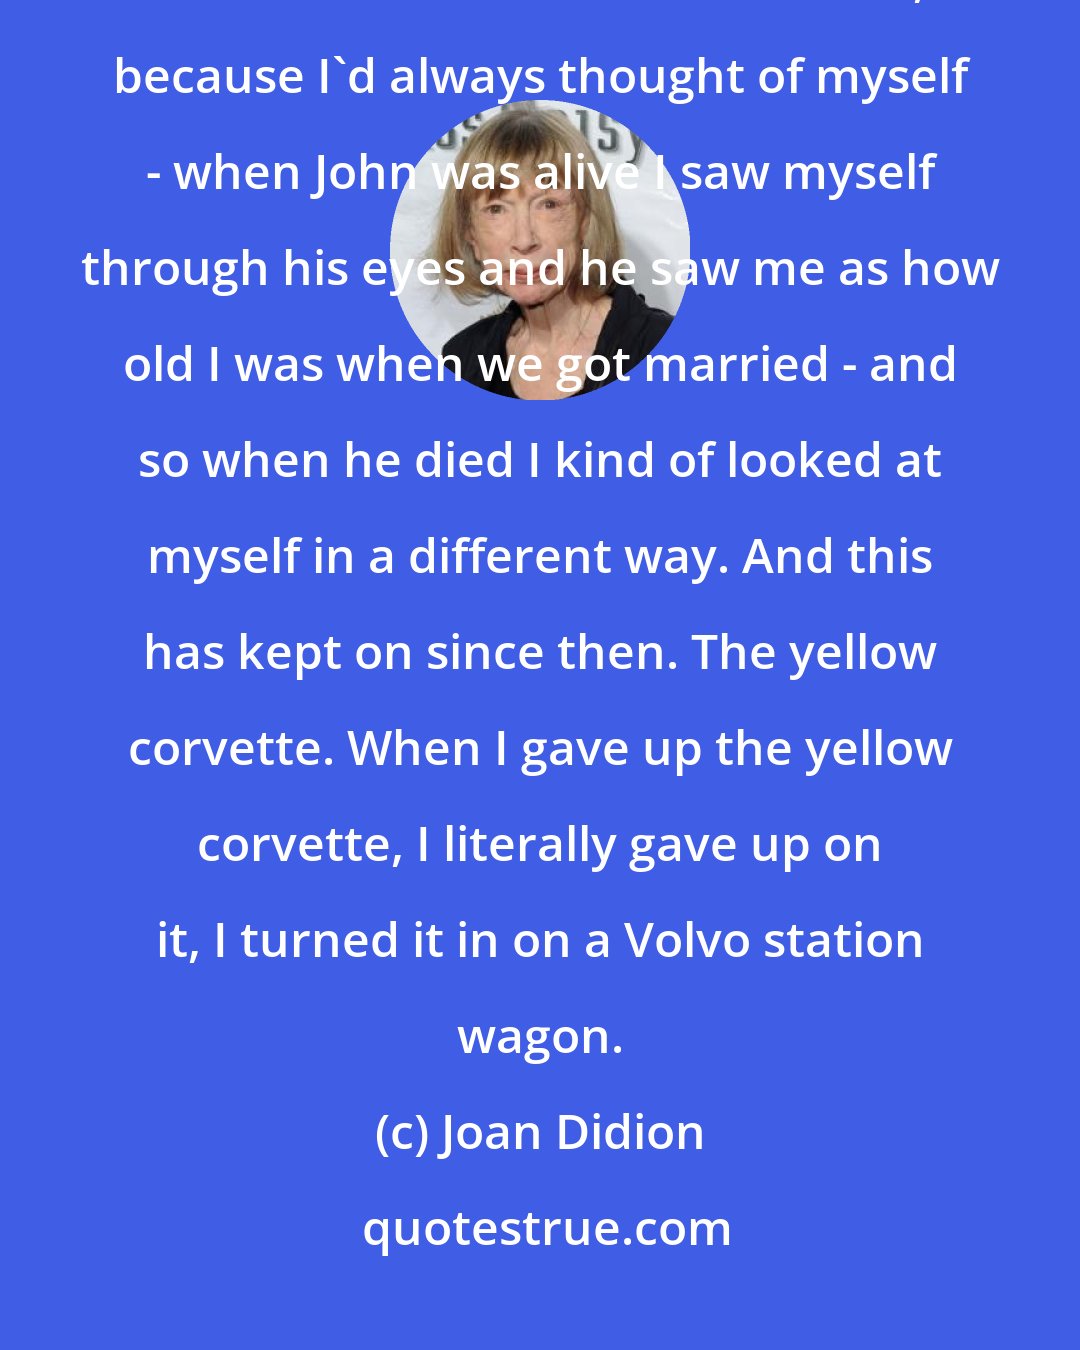 Joan Didion: Actually, when John died, for the first time I thought - for the first time I realized how old I was, because I'd always thought of myself - when John was alive I saw myself through his eyes and he saw me as how old I was when we got married - and so when he died I kind of looked at myself in a different way. And this has kept on since then. The yellow corvette. When I gave up the yellow corvette, I literally gave up on it, I turned it in on a Volvo station wagon.